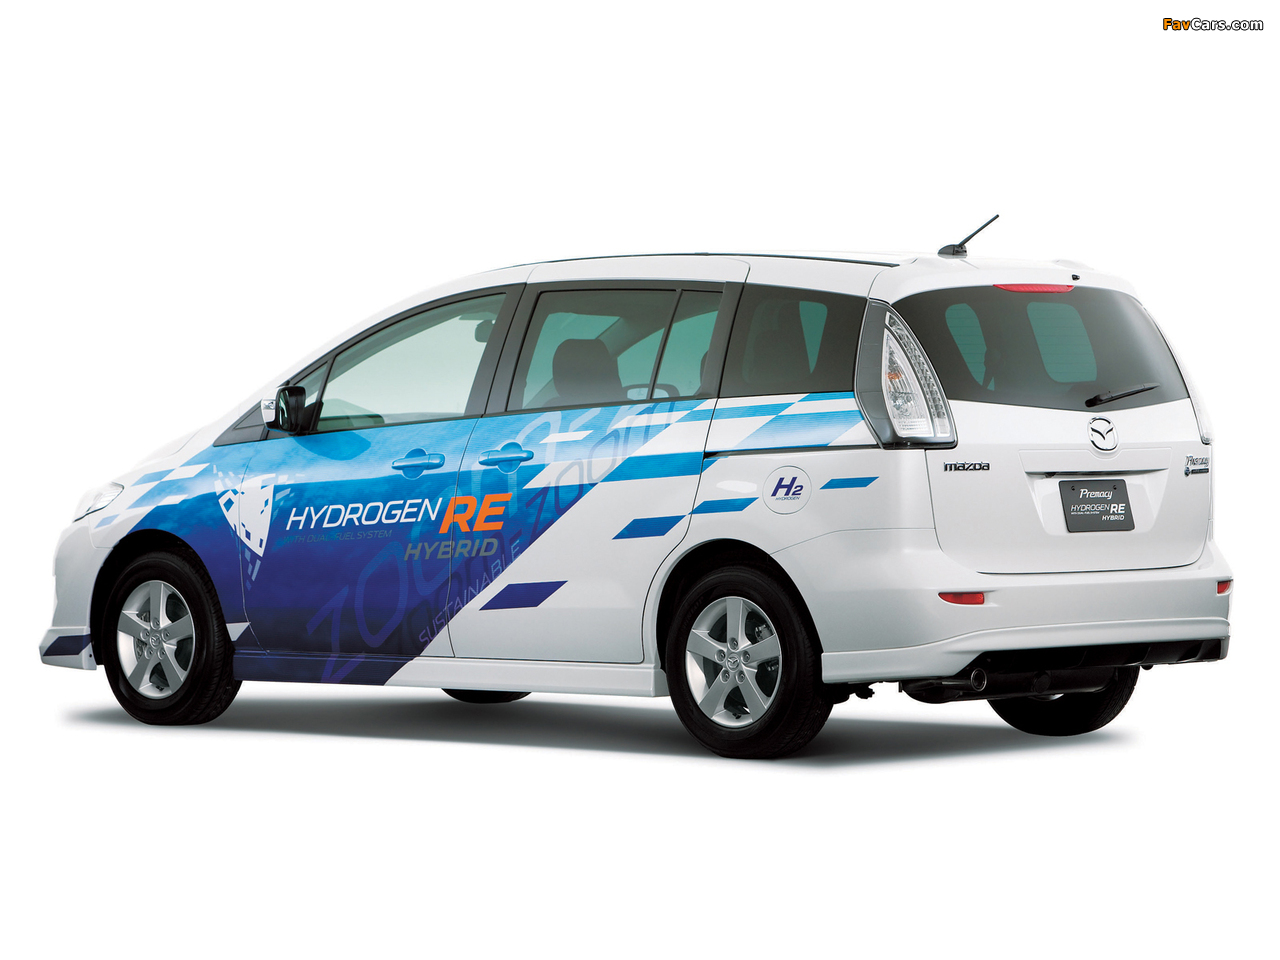 Pictures of Mazda Premacy Hydrogen RE 2009 (1280 x 960)